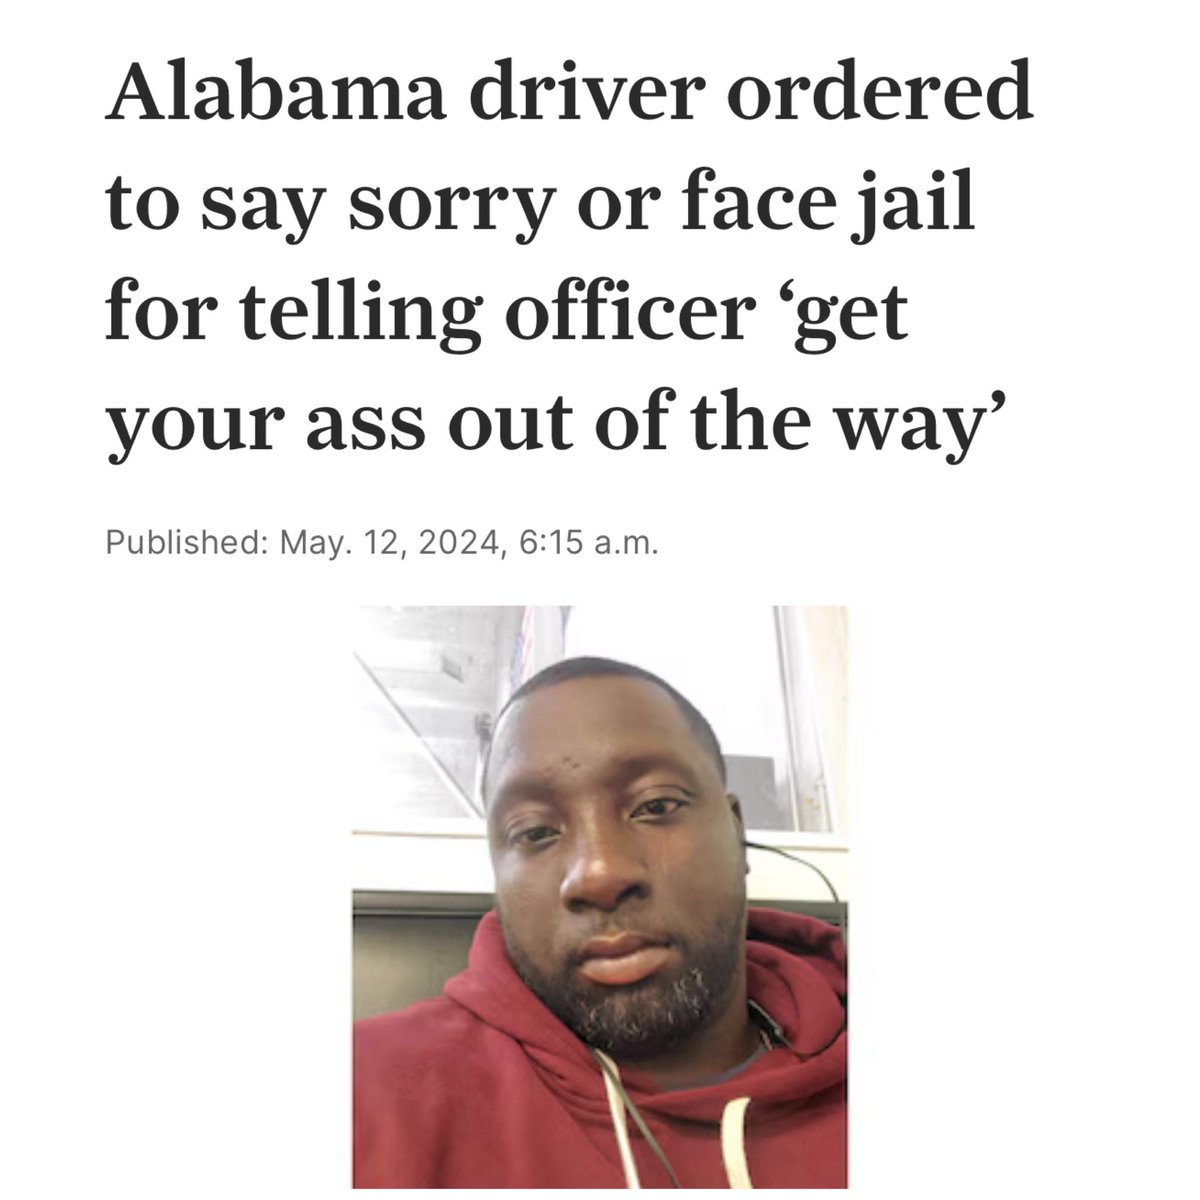 ‼️WHITE COP wants BLACK MAN to APOLOGIZE for CURSING at him and HURTING HIS FEELINGS 😂 Reginald Burks a BLACK Alabama driver who told a RAClST WHITE COP ‘get your ass out of the way’ (FREEDOM OF SPEECH) has been ORDERED to APOLOGIZE or go to JAIL for up to 30 days 🤦🏽‍♂️ RAClST